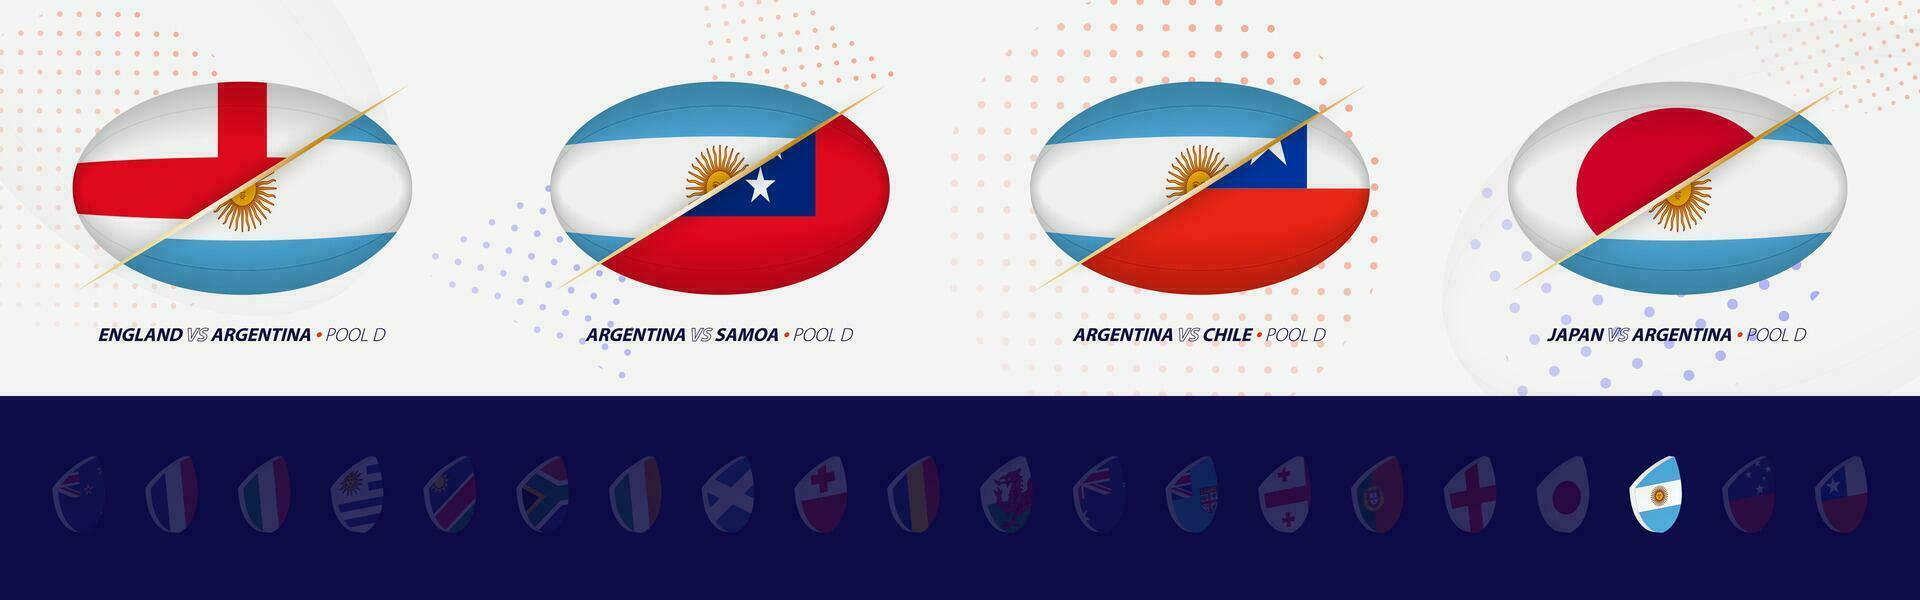 Rugby competition icons of Argentina rugby national team, all four matches icon in pool. vector